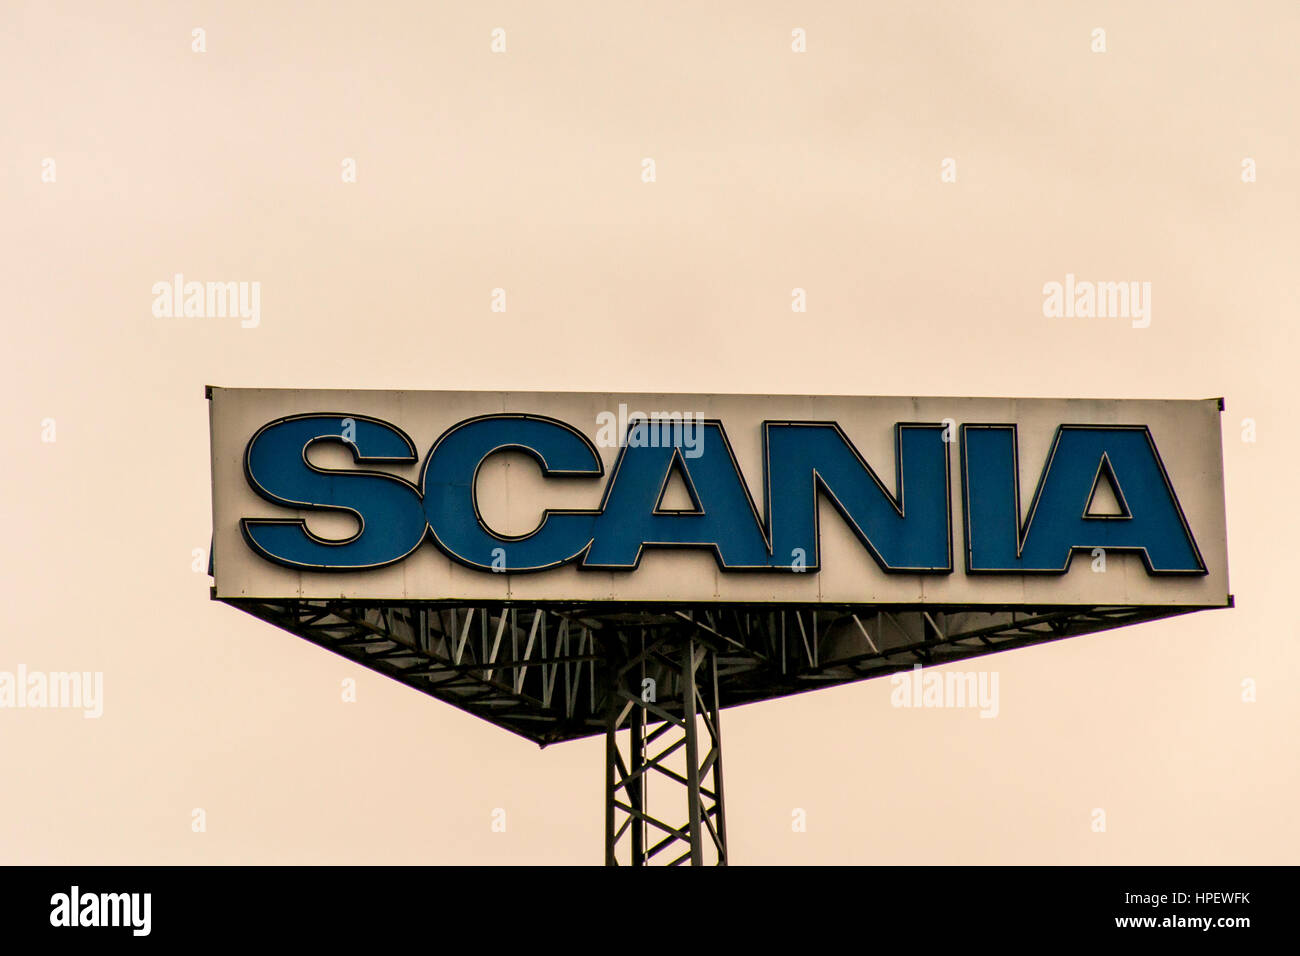 Koblenz, Germany - 20.02.2017 : Sign tower Scania trucks Logo against cloudy sky sunset at german service headquater Stock Photo